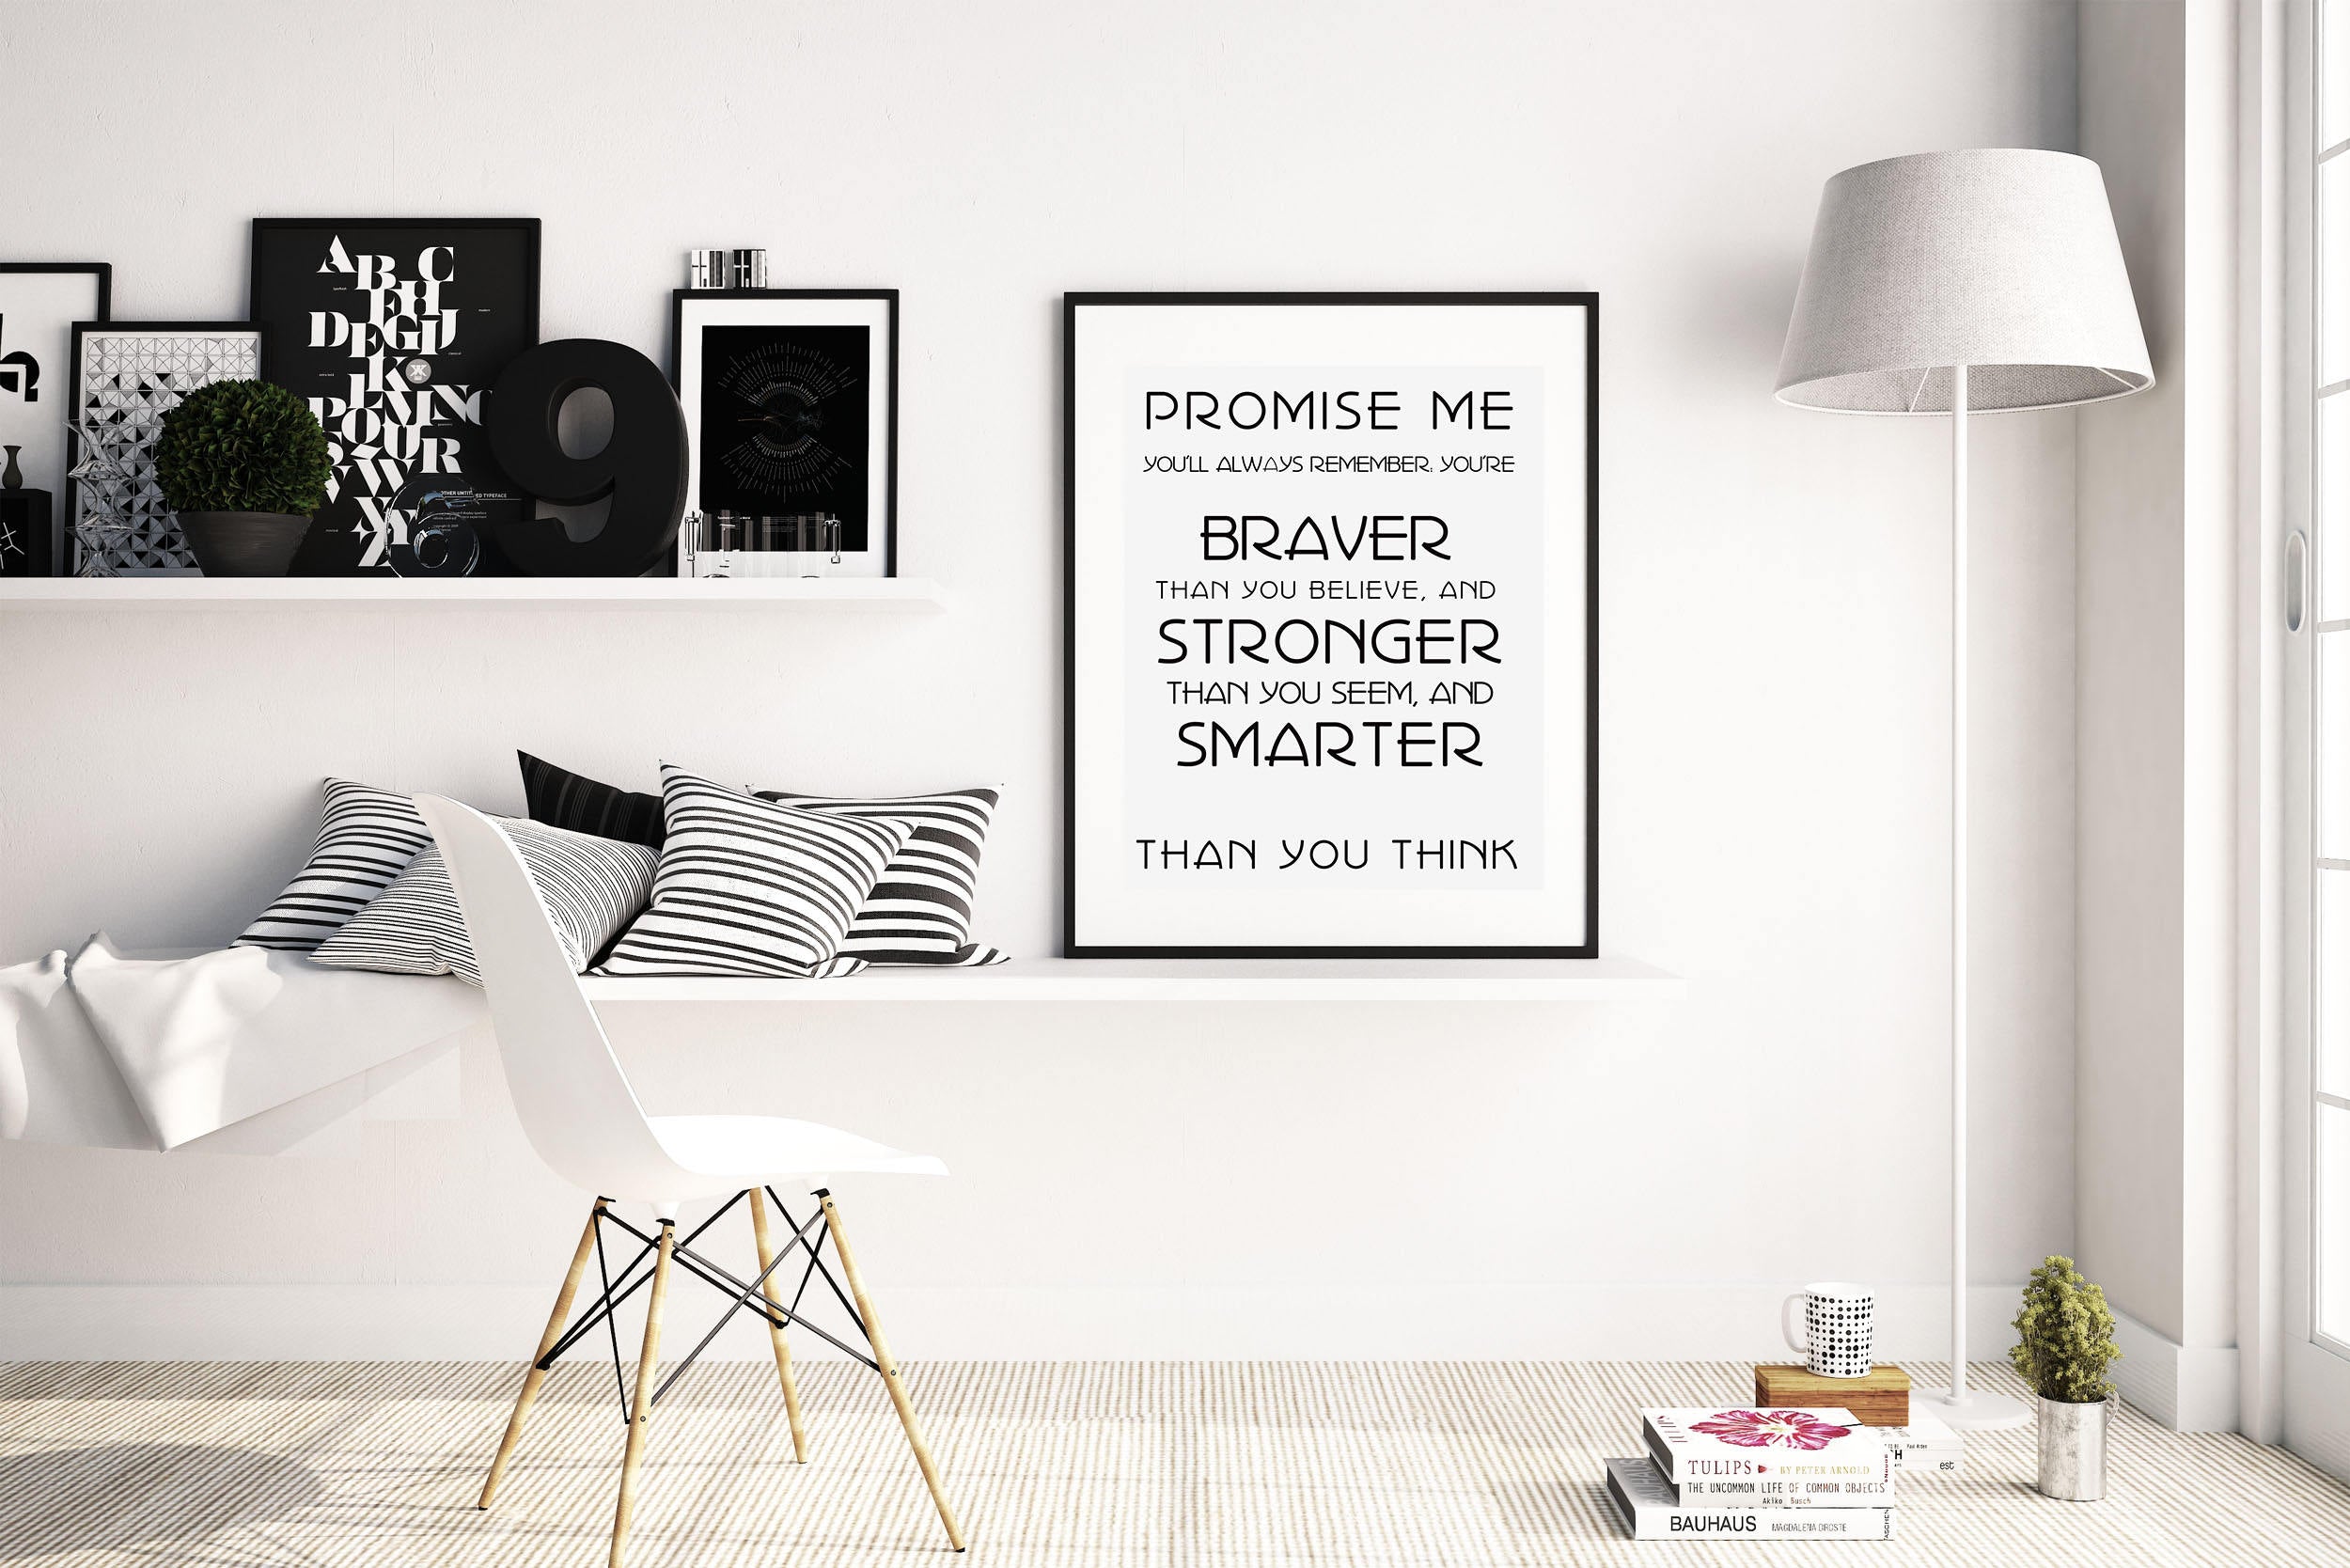 Pooh Art Print, Positive Quote, AA Milne Quote, inspirational poster, Winnie the Pooh quotes, Pooh Wall Art, encouraging art print Unframed - BookQuoteDecor